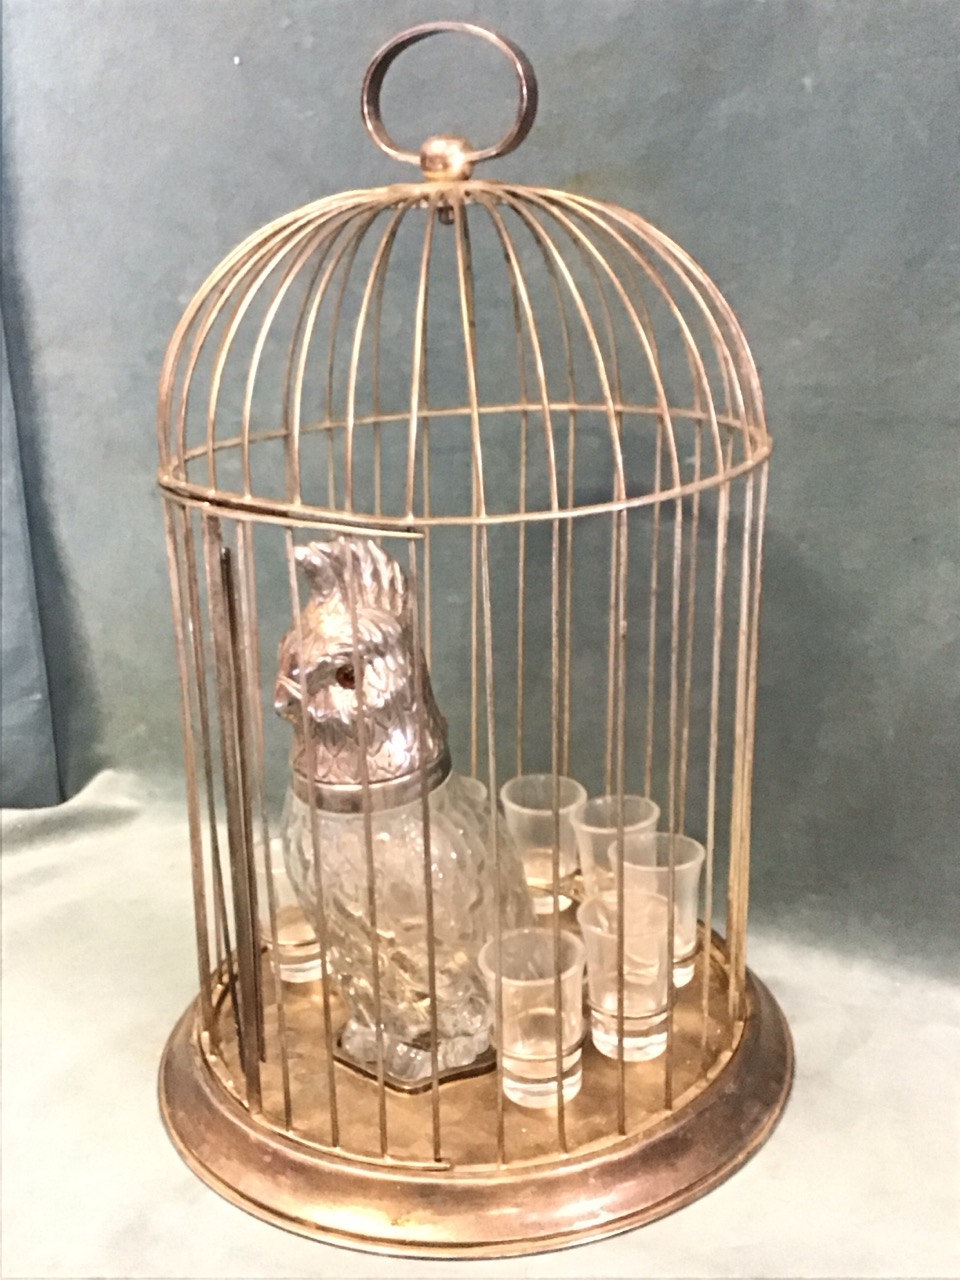 A 30s novelty cocktail set in the form of a circular domed birdcage with a mould-blown glass